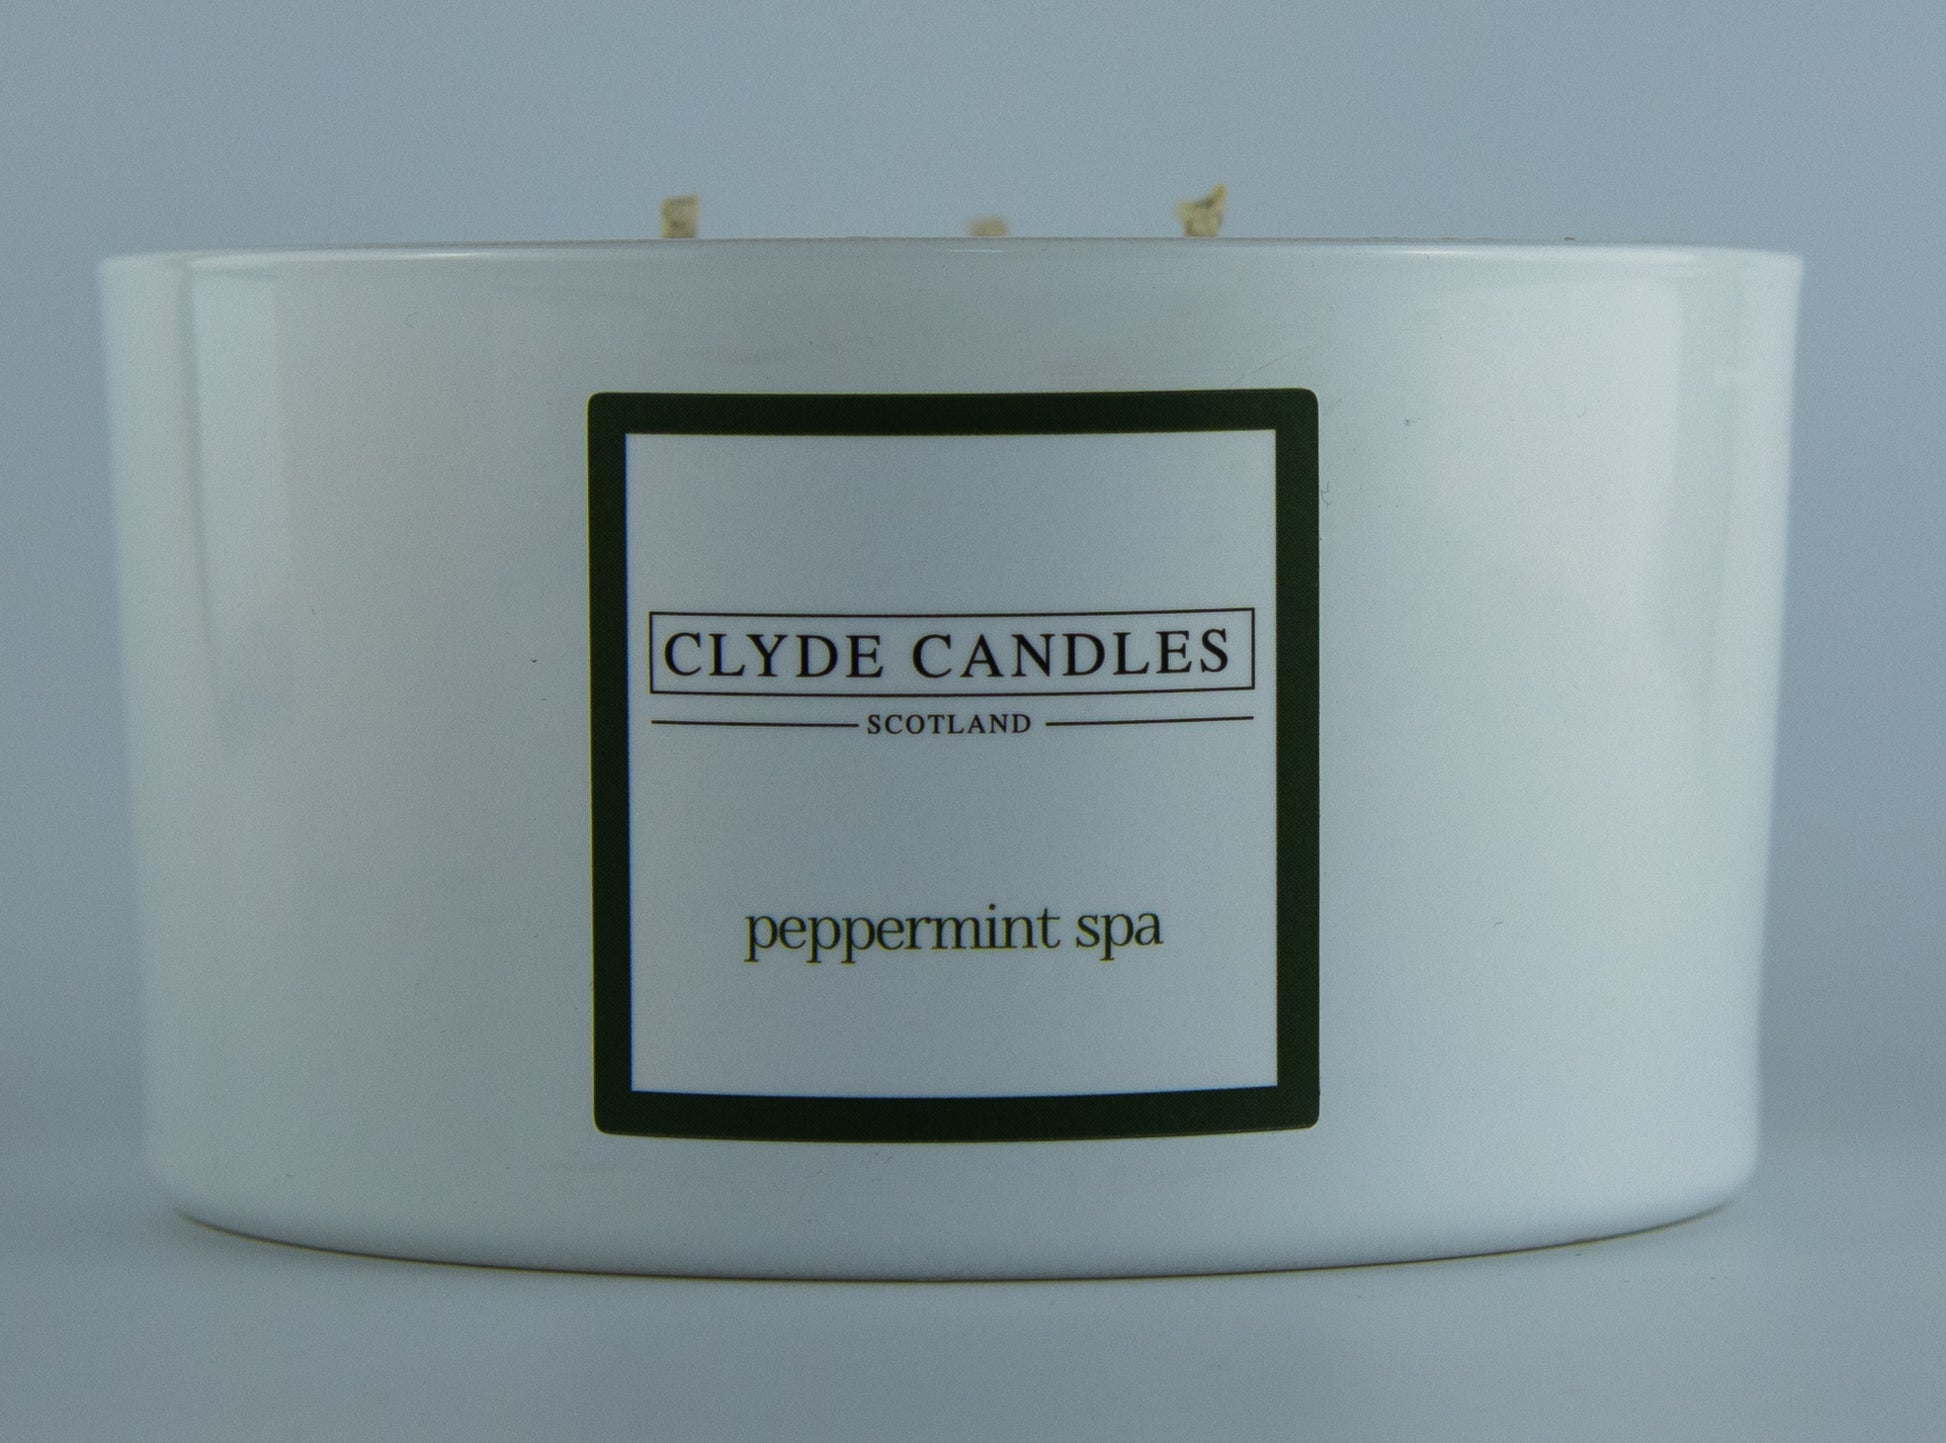 Peppermint Spa Scented Candle Gift Box Three Wicks, Natural Soy wax, Scottish Candles, Clyde Candles, eucalyptus soy candle, Fresh candle, bathroom candle